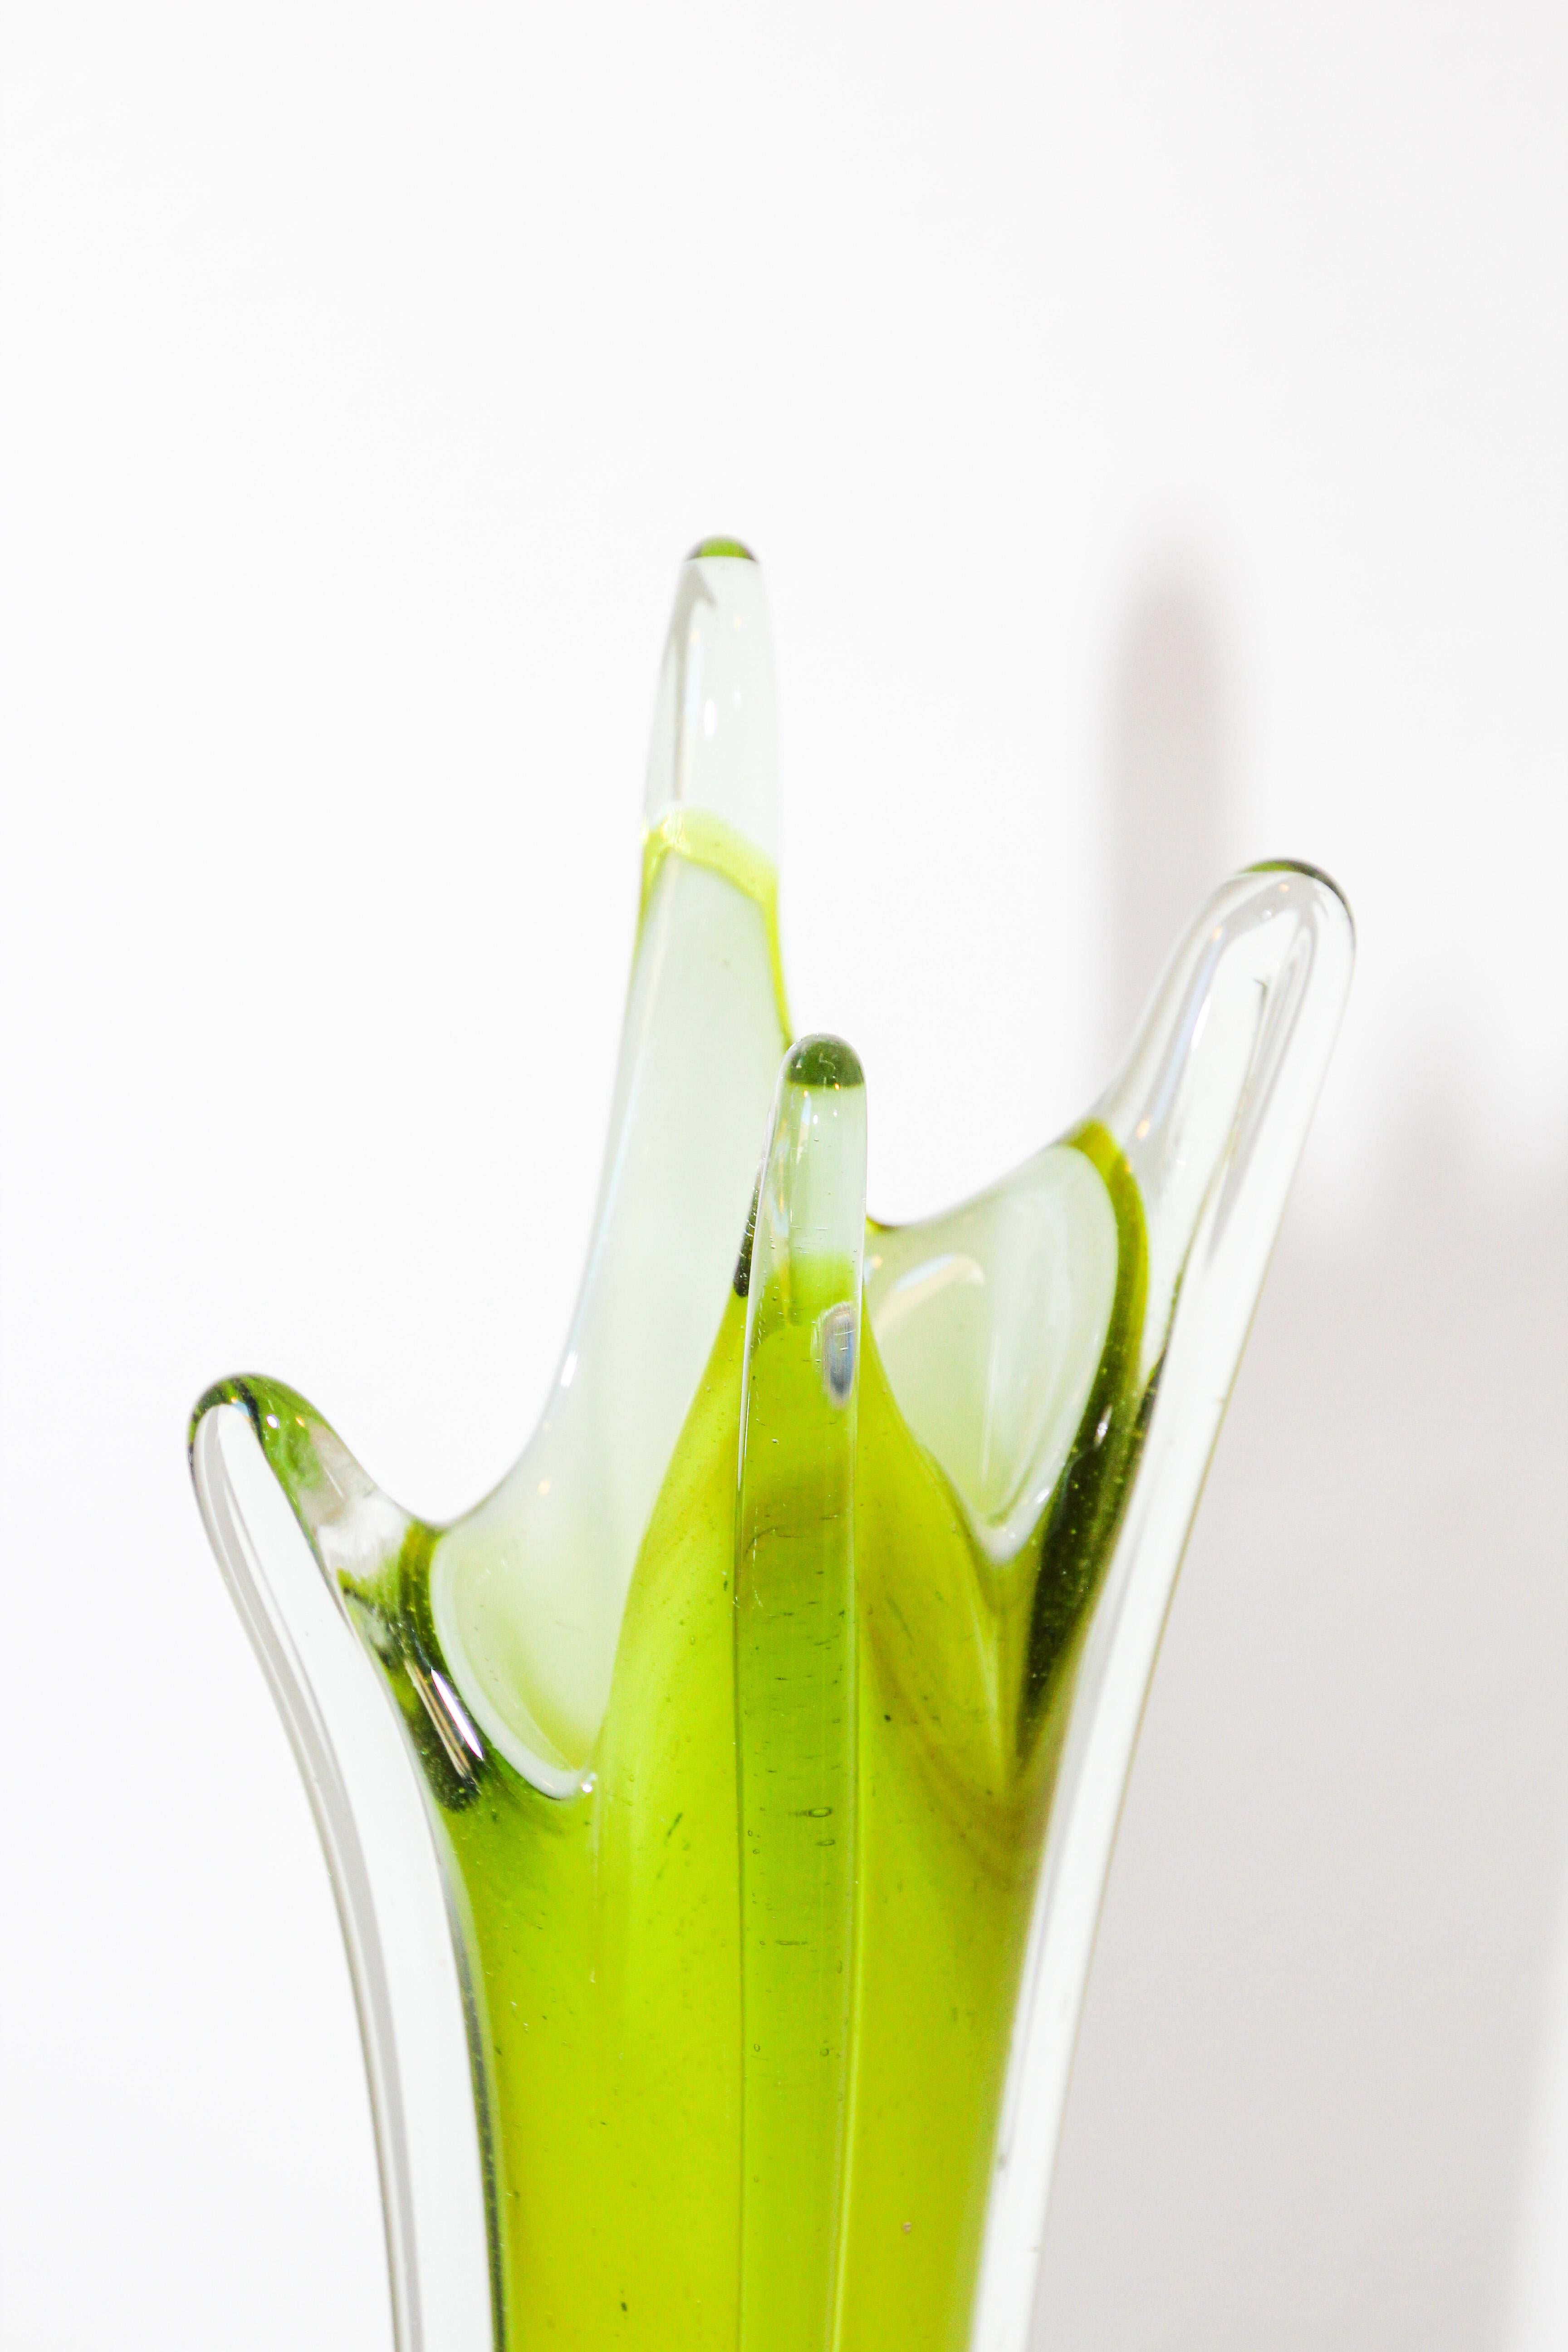 Italian Murano Handblown Art Glass Vase Sculpture Long Neck In Good Condition For Sale In North Hollywood, CA